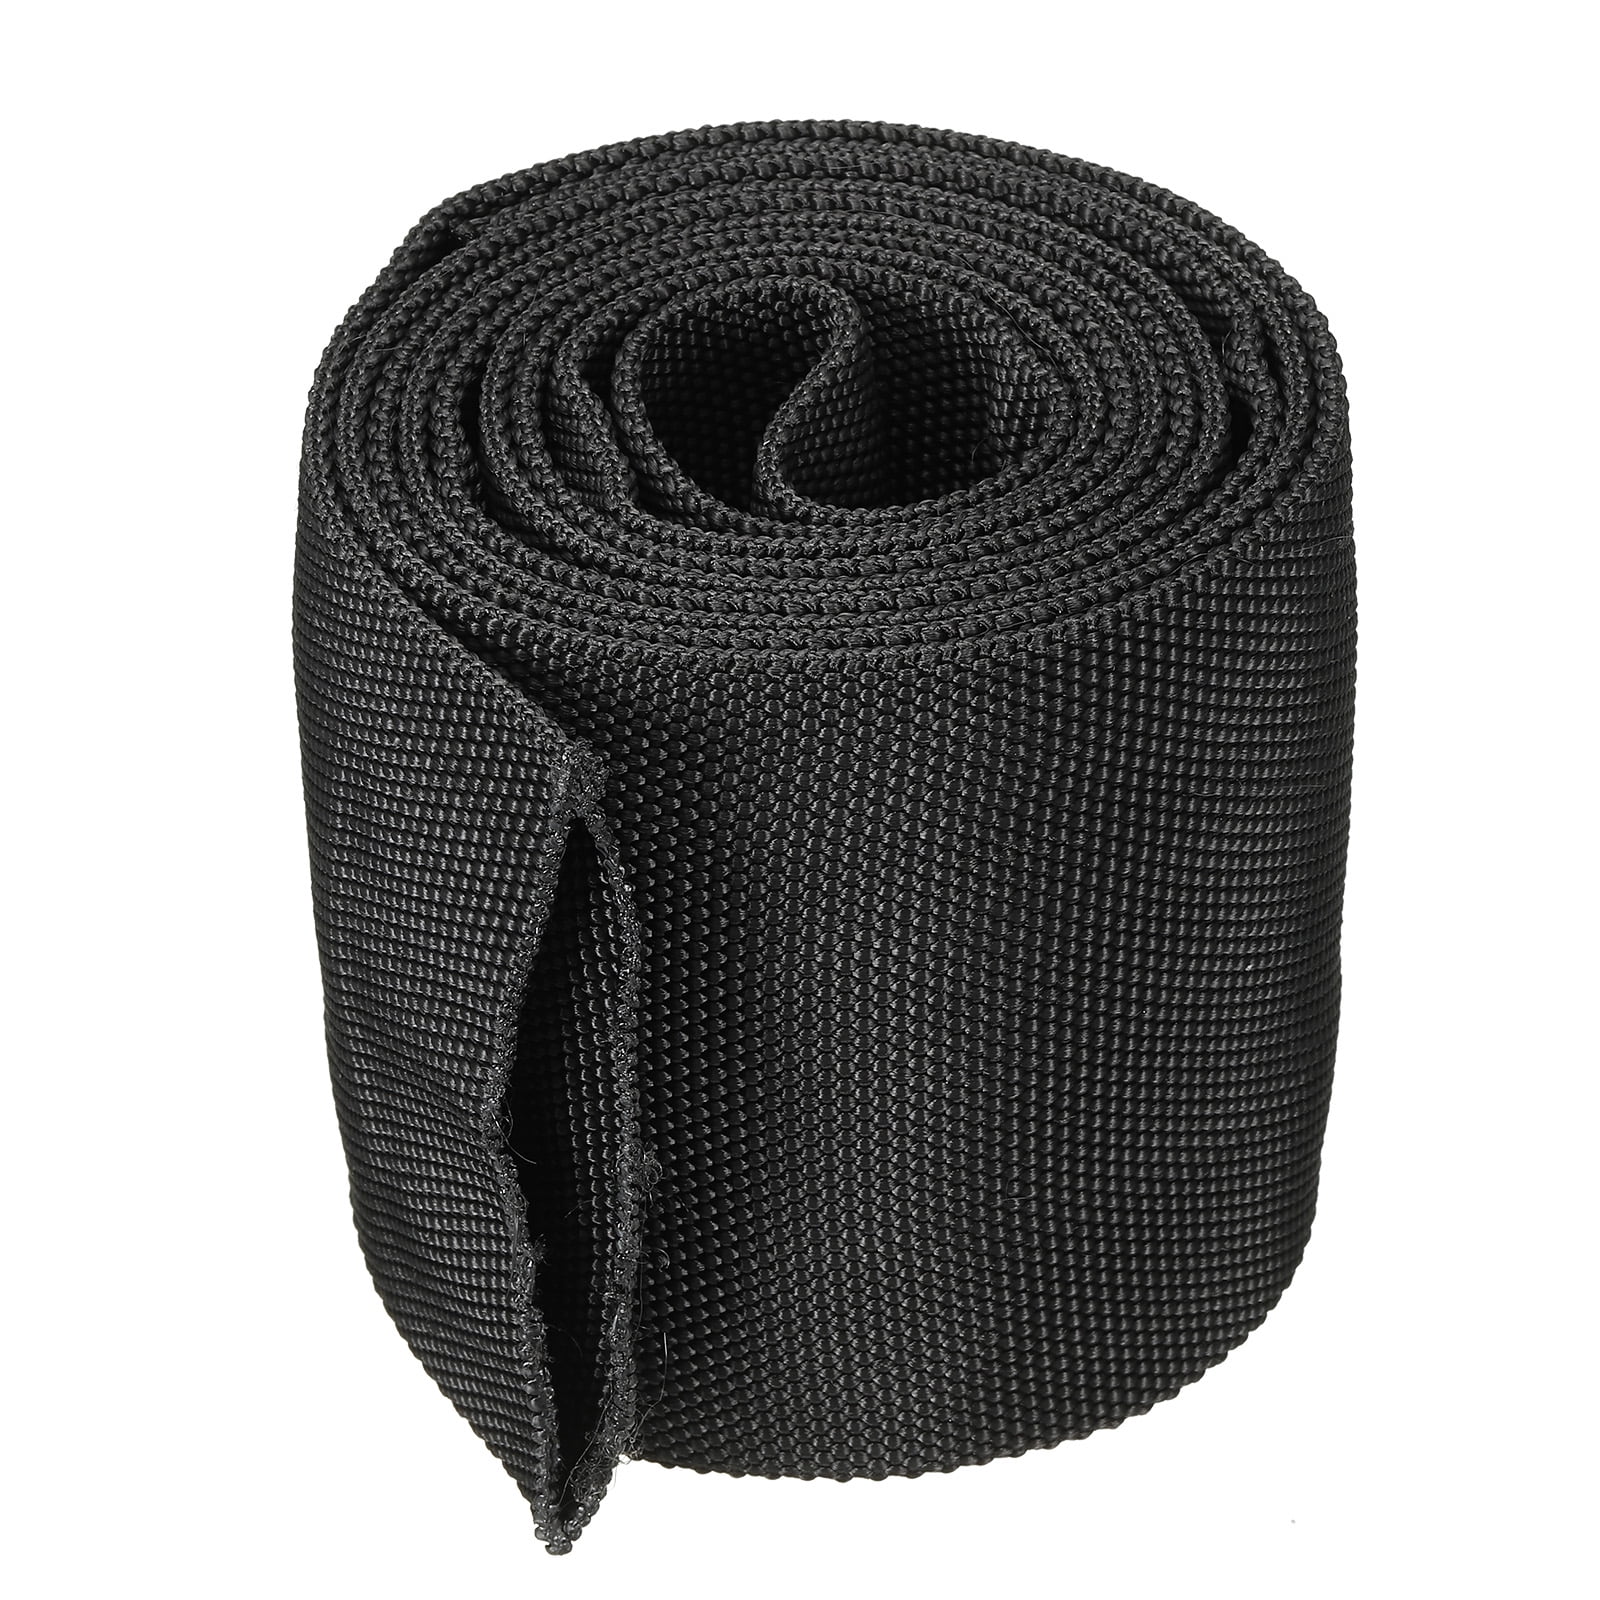 Uxcell 4 inch ID 3.3ft Nylon Protective Hose Sleeve, Cable Cover Sheath Protection, Black, Size: 4x3.3